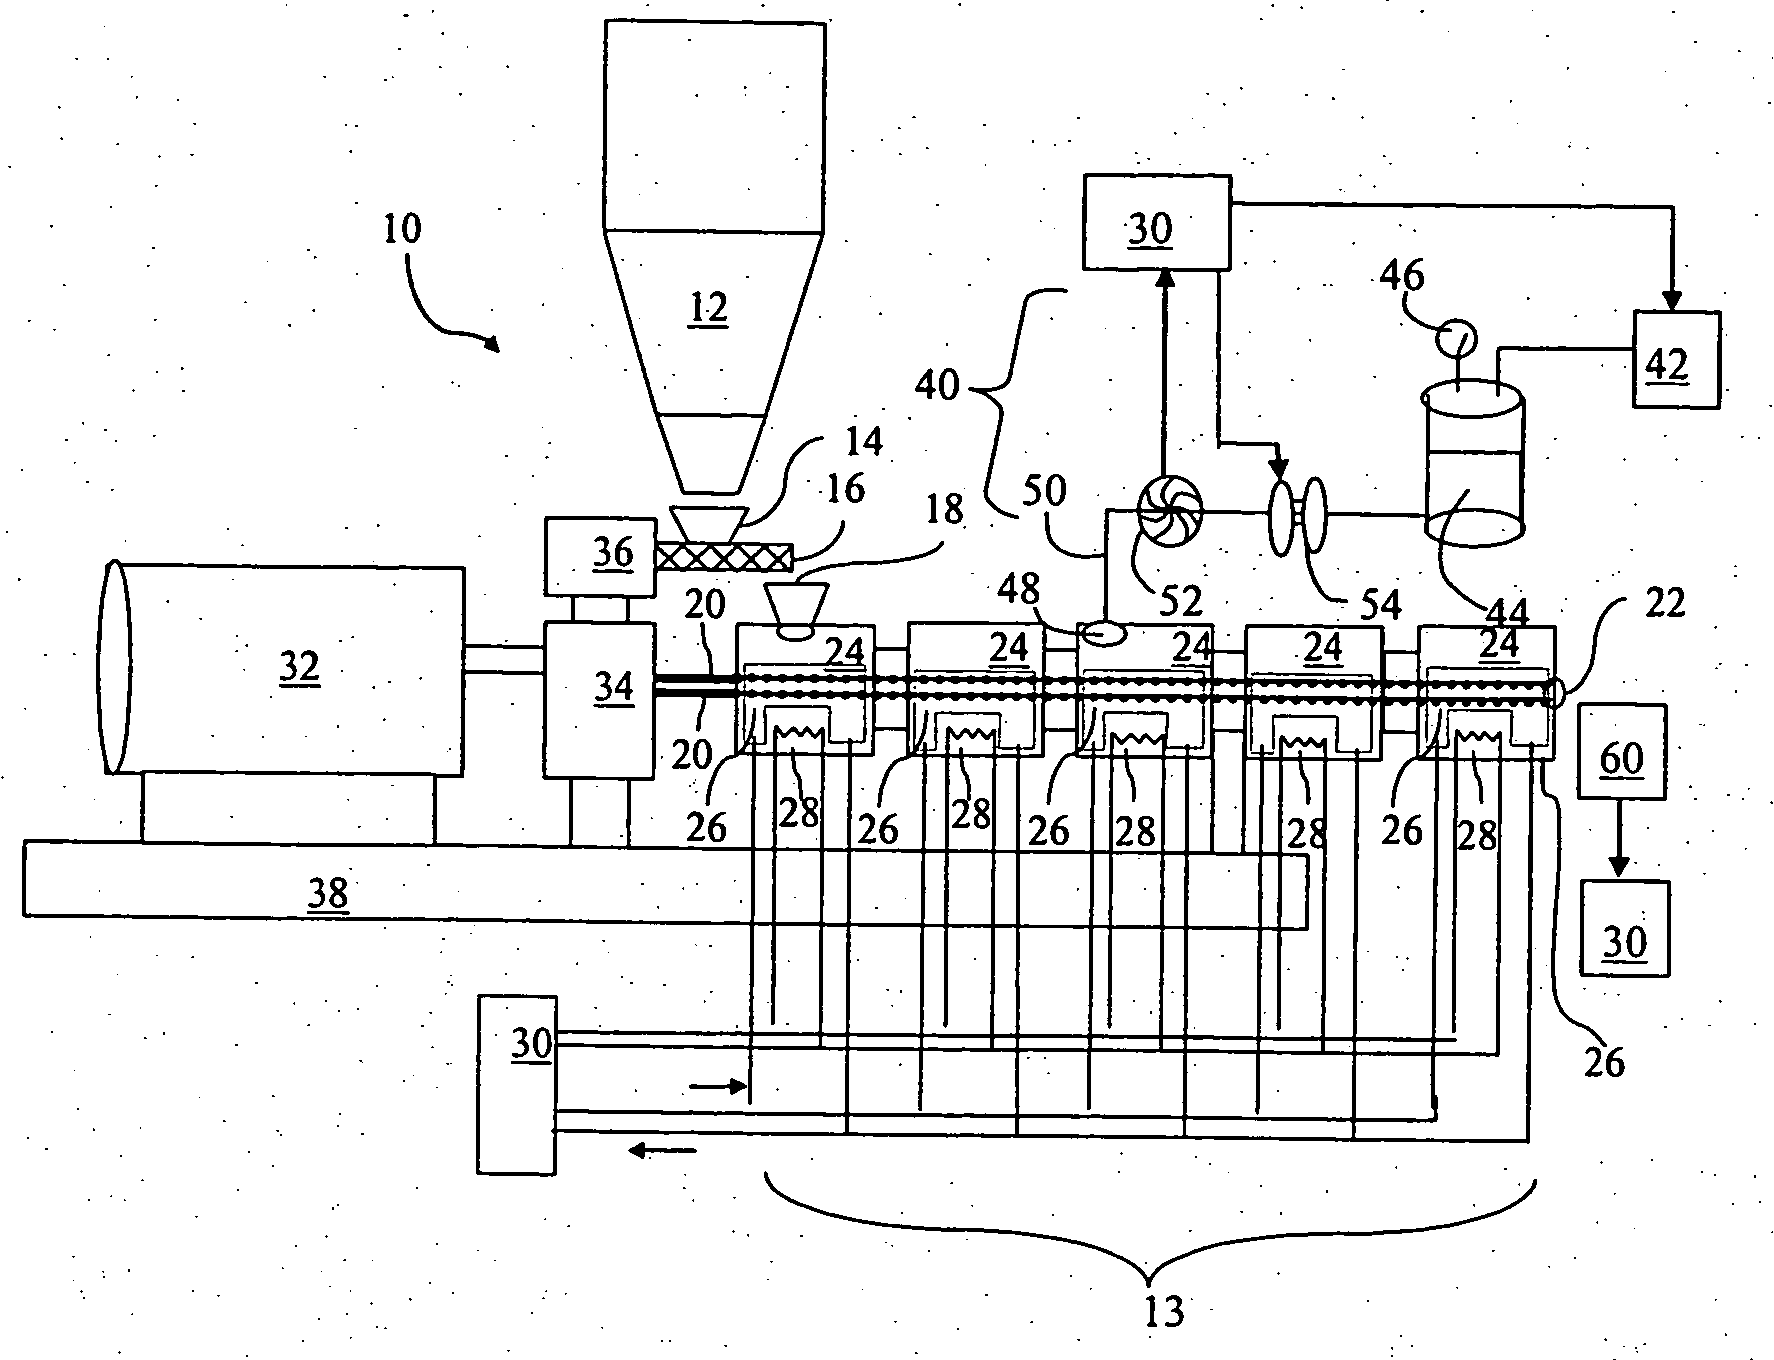 Apparatus for manufacturing thermosetting powder coating compositions with dynamic control including low pressure injection system